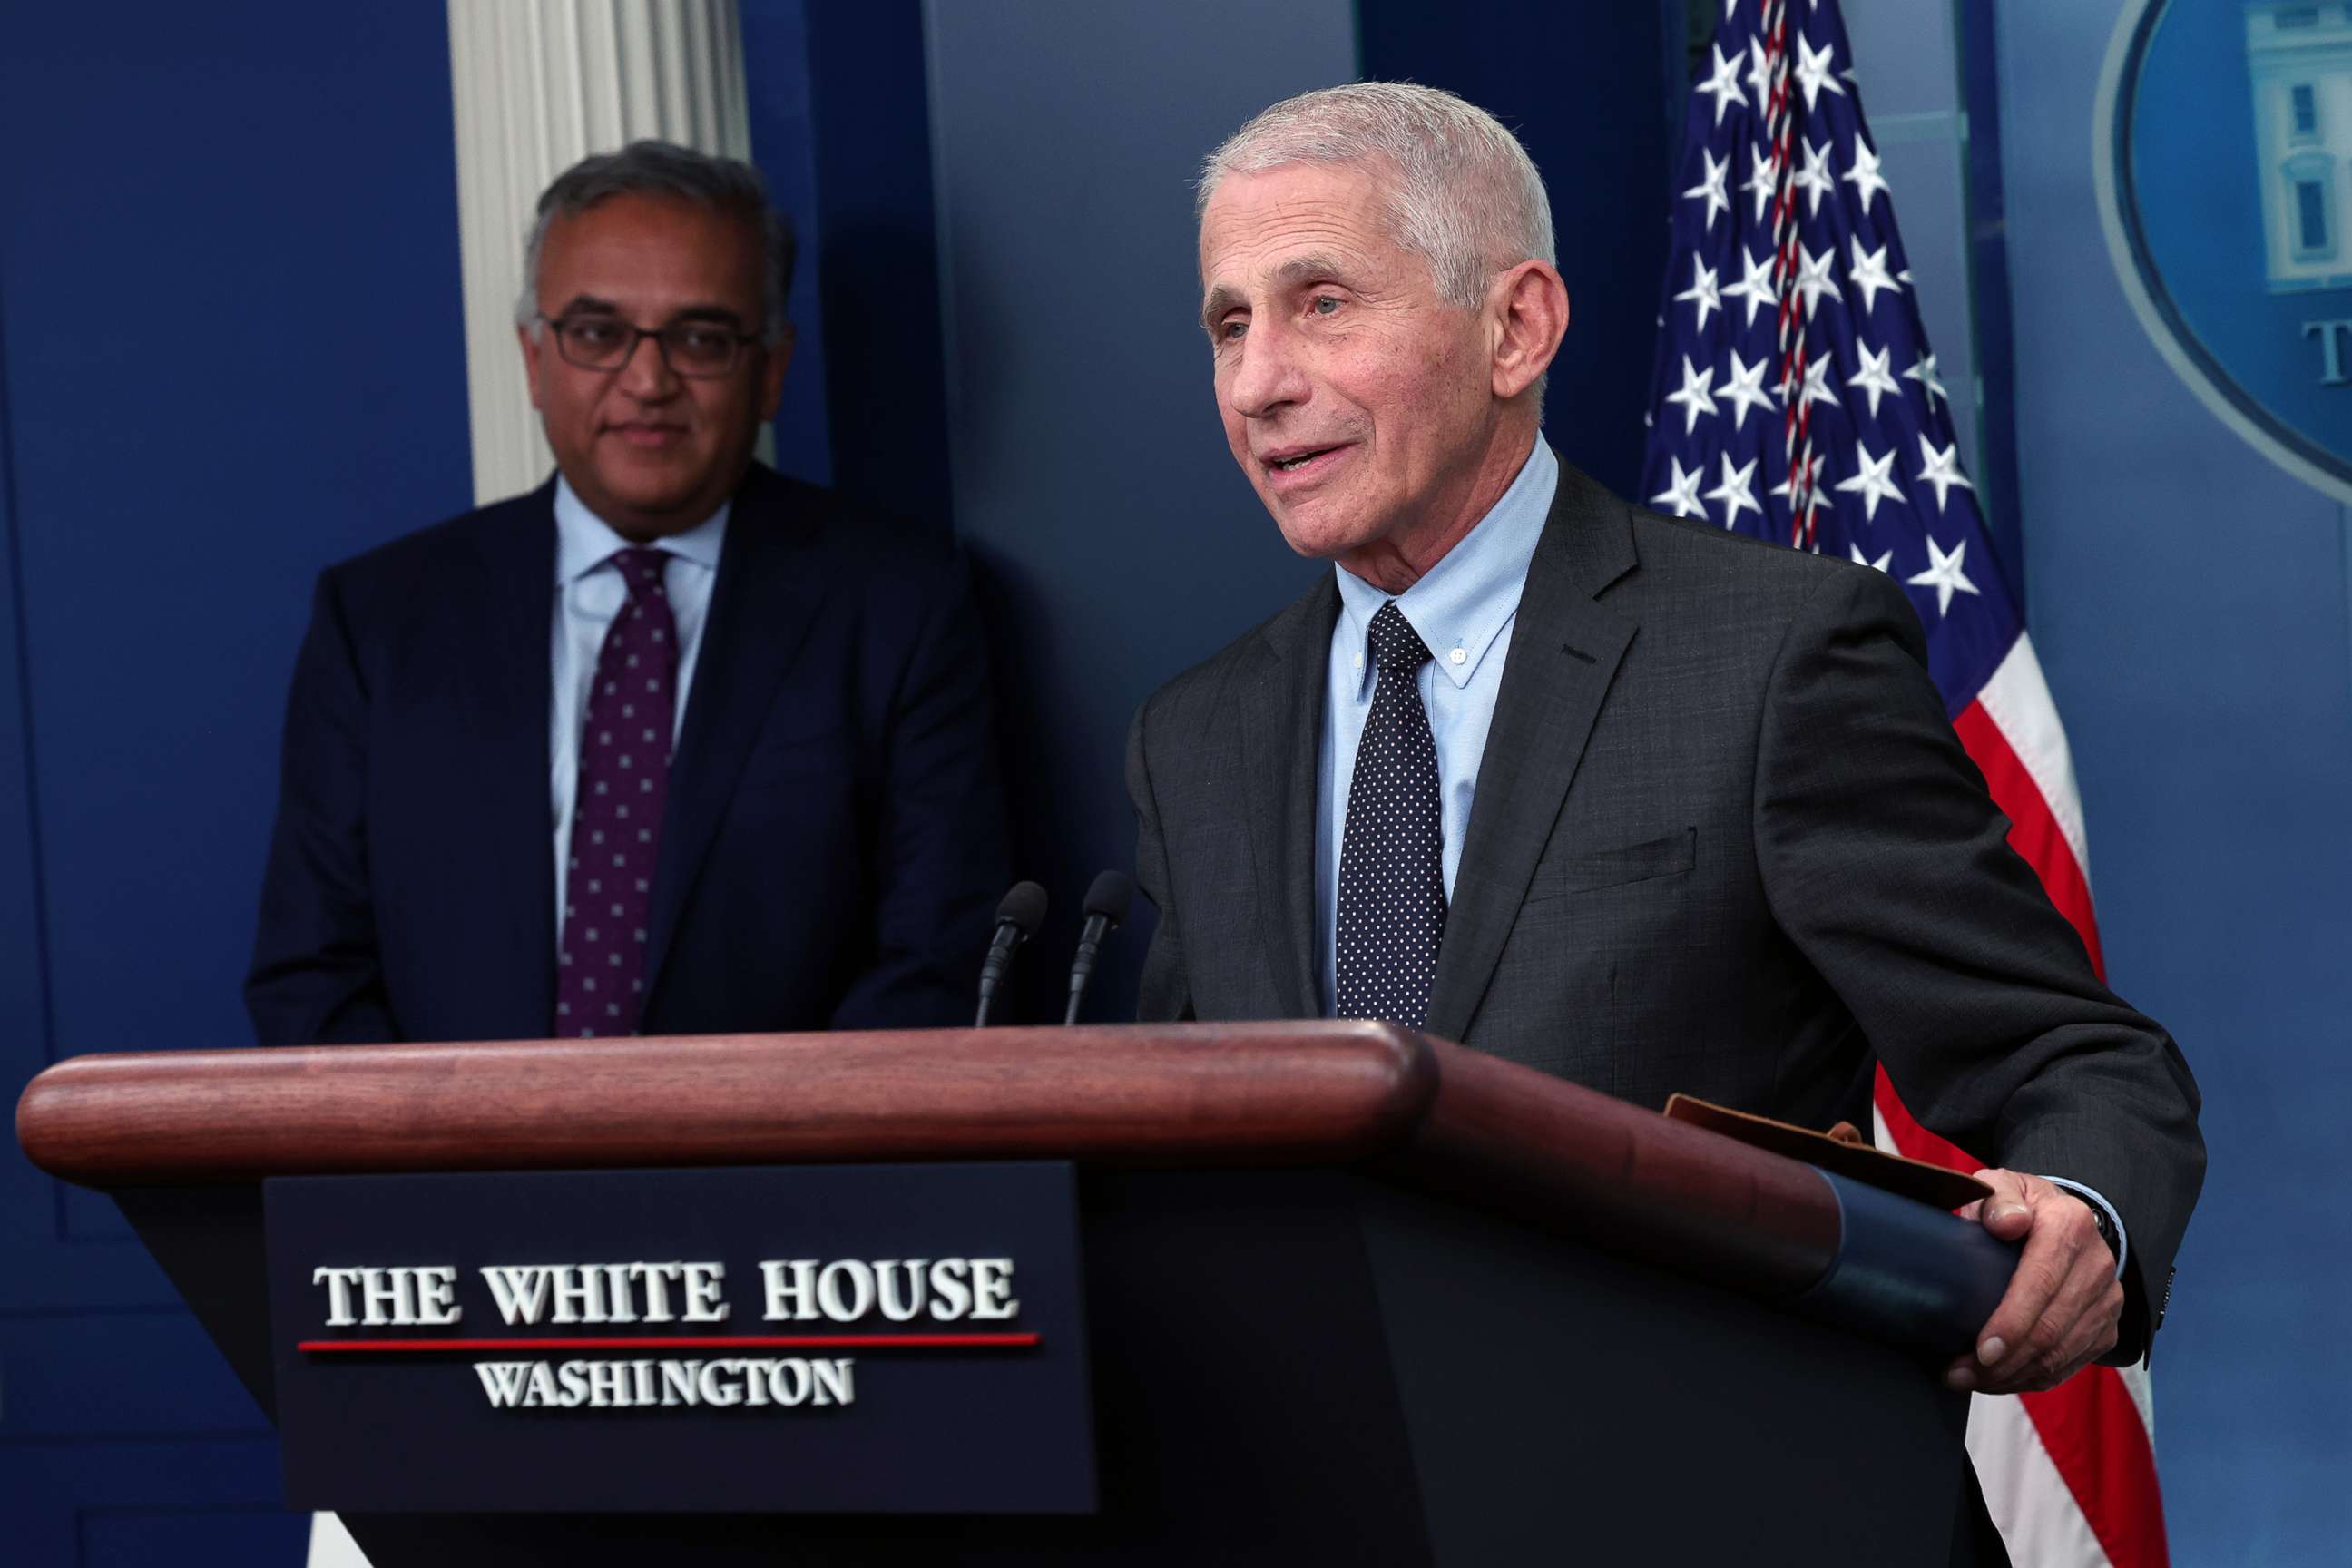 PHOTO: Dr. Anthony Fauci, White House chief medical advisor, speaks alongside COVID-19 Response Coordinator Dr. Ashish Jha during a briefing on COVID-19 at the White House, Nov. 22, 2022.